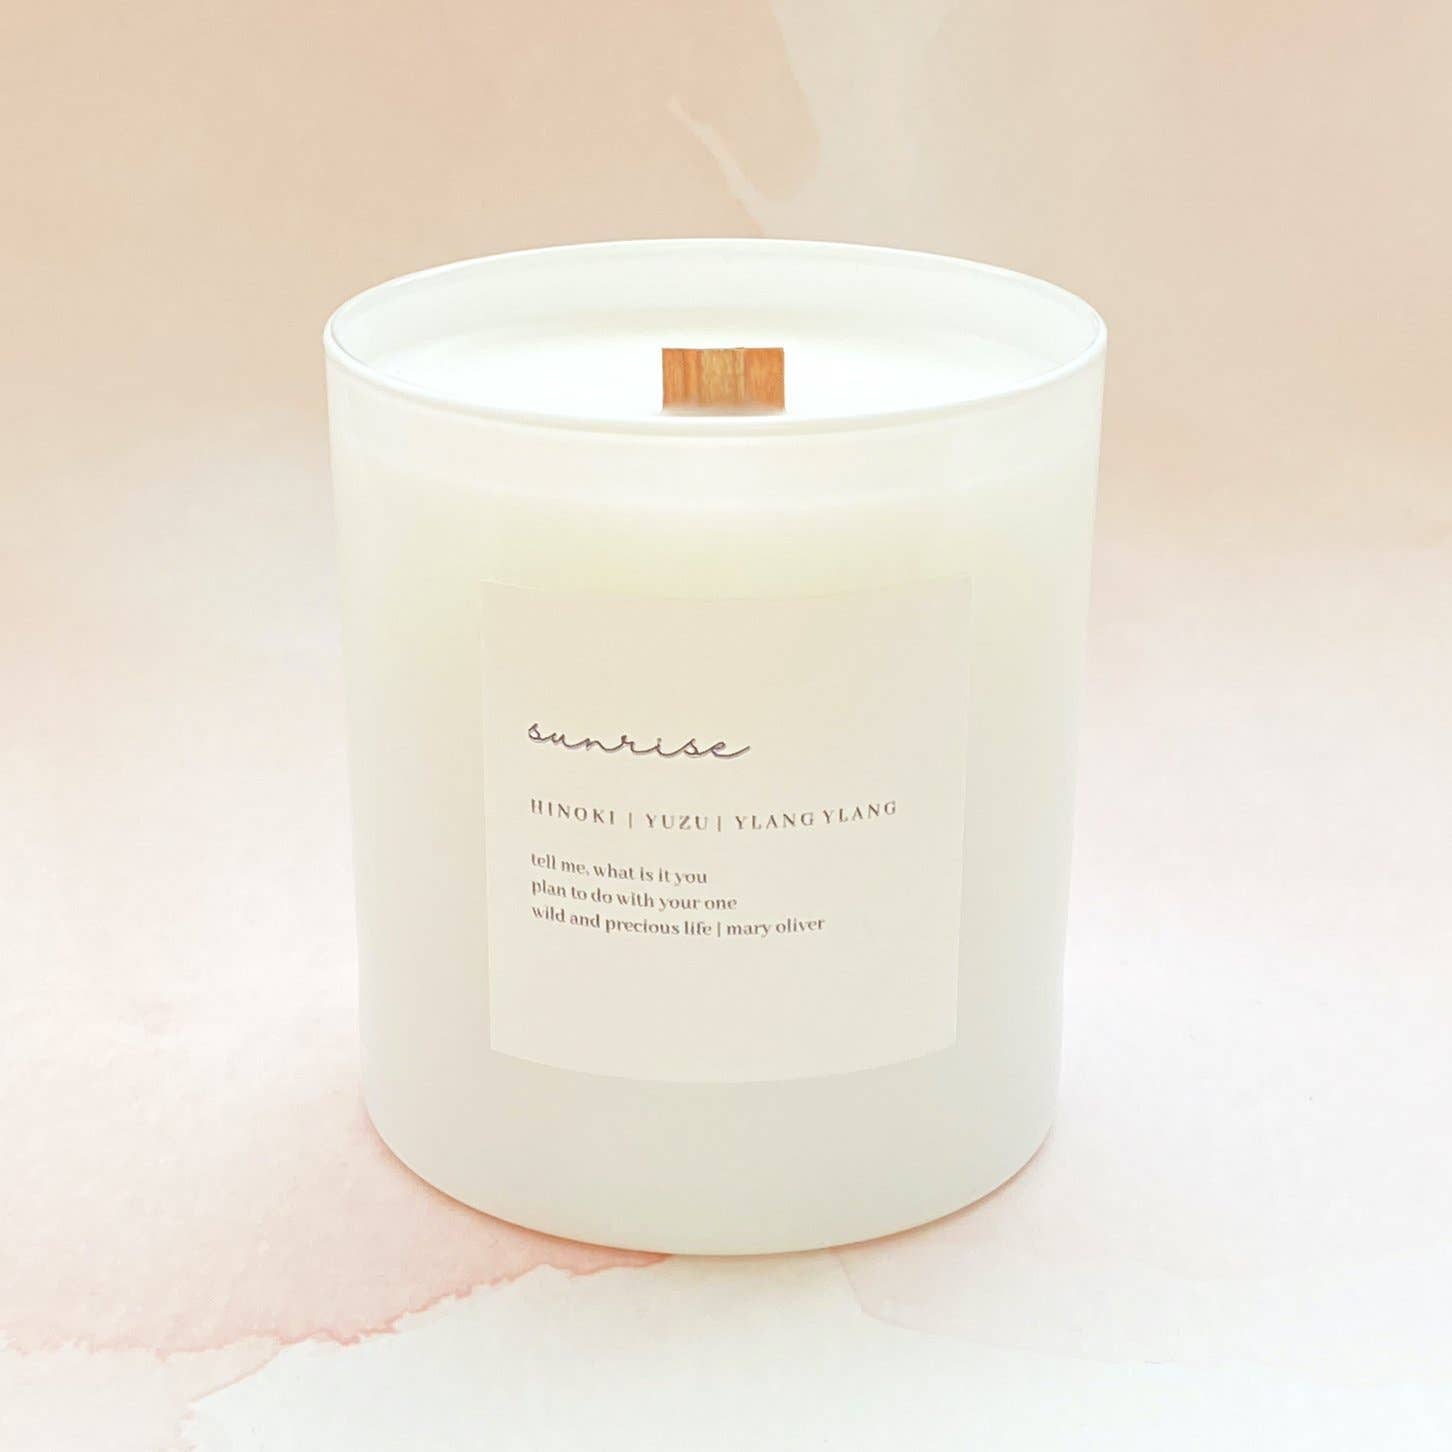 The Sunrise Candle by Wild Poet